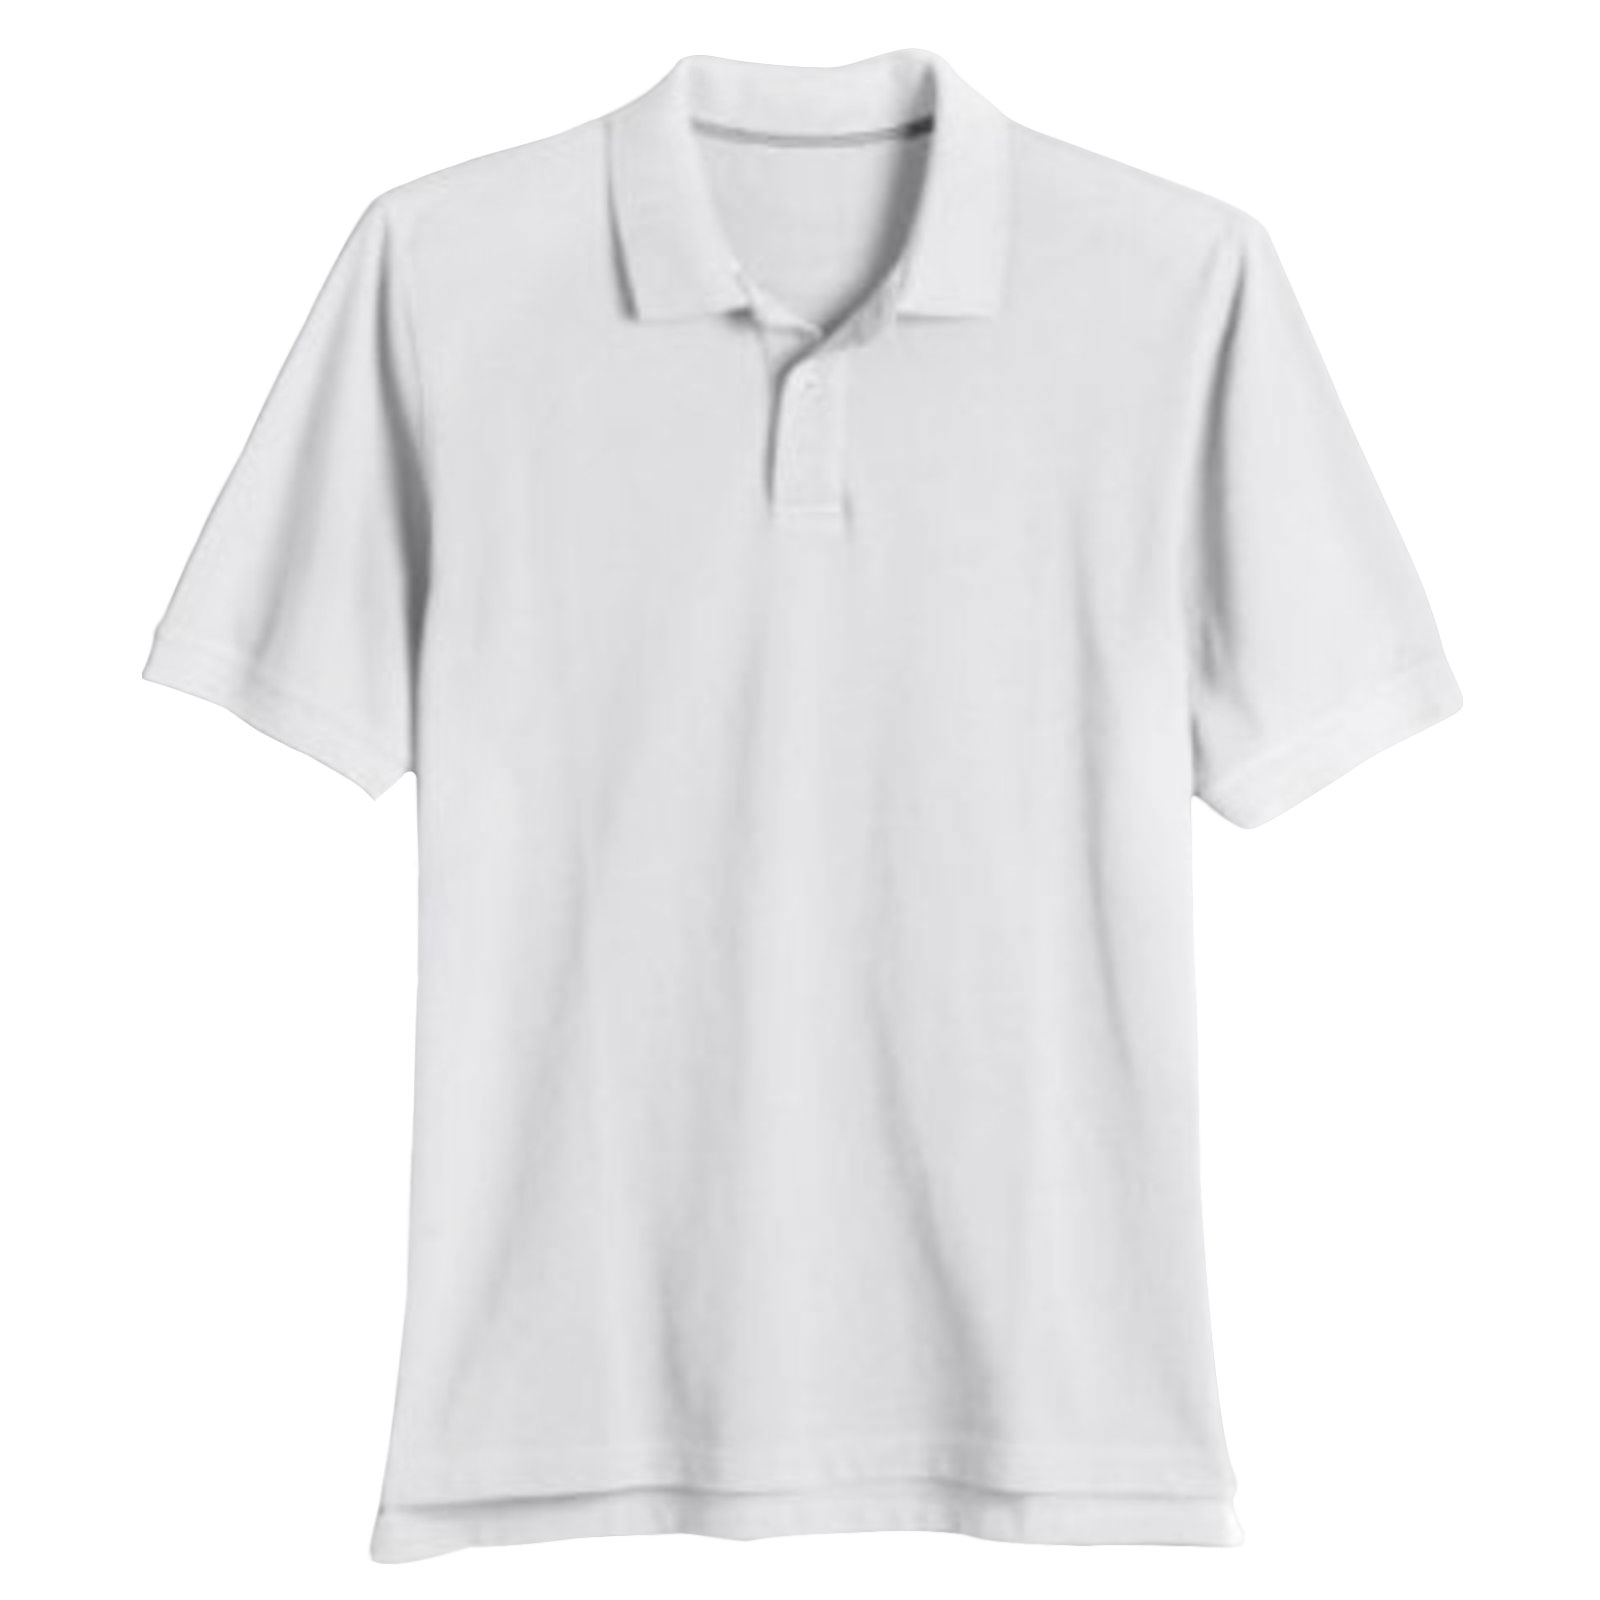 Basic Editions Men's Solid Pique Polo Shirt